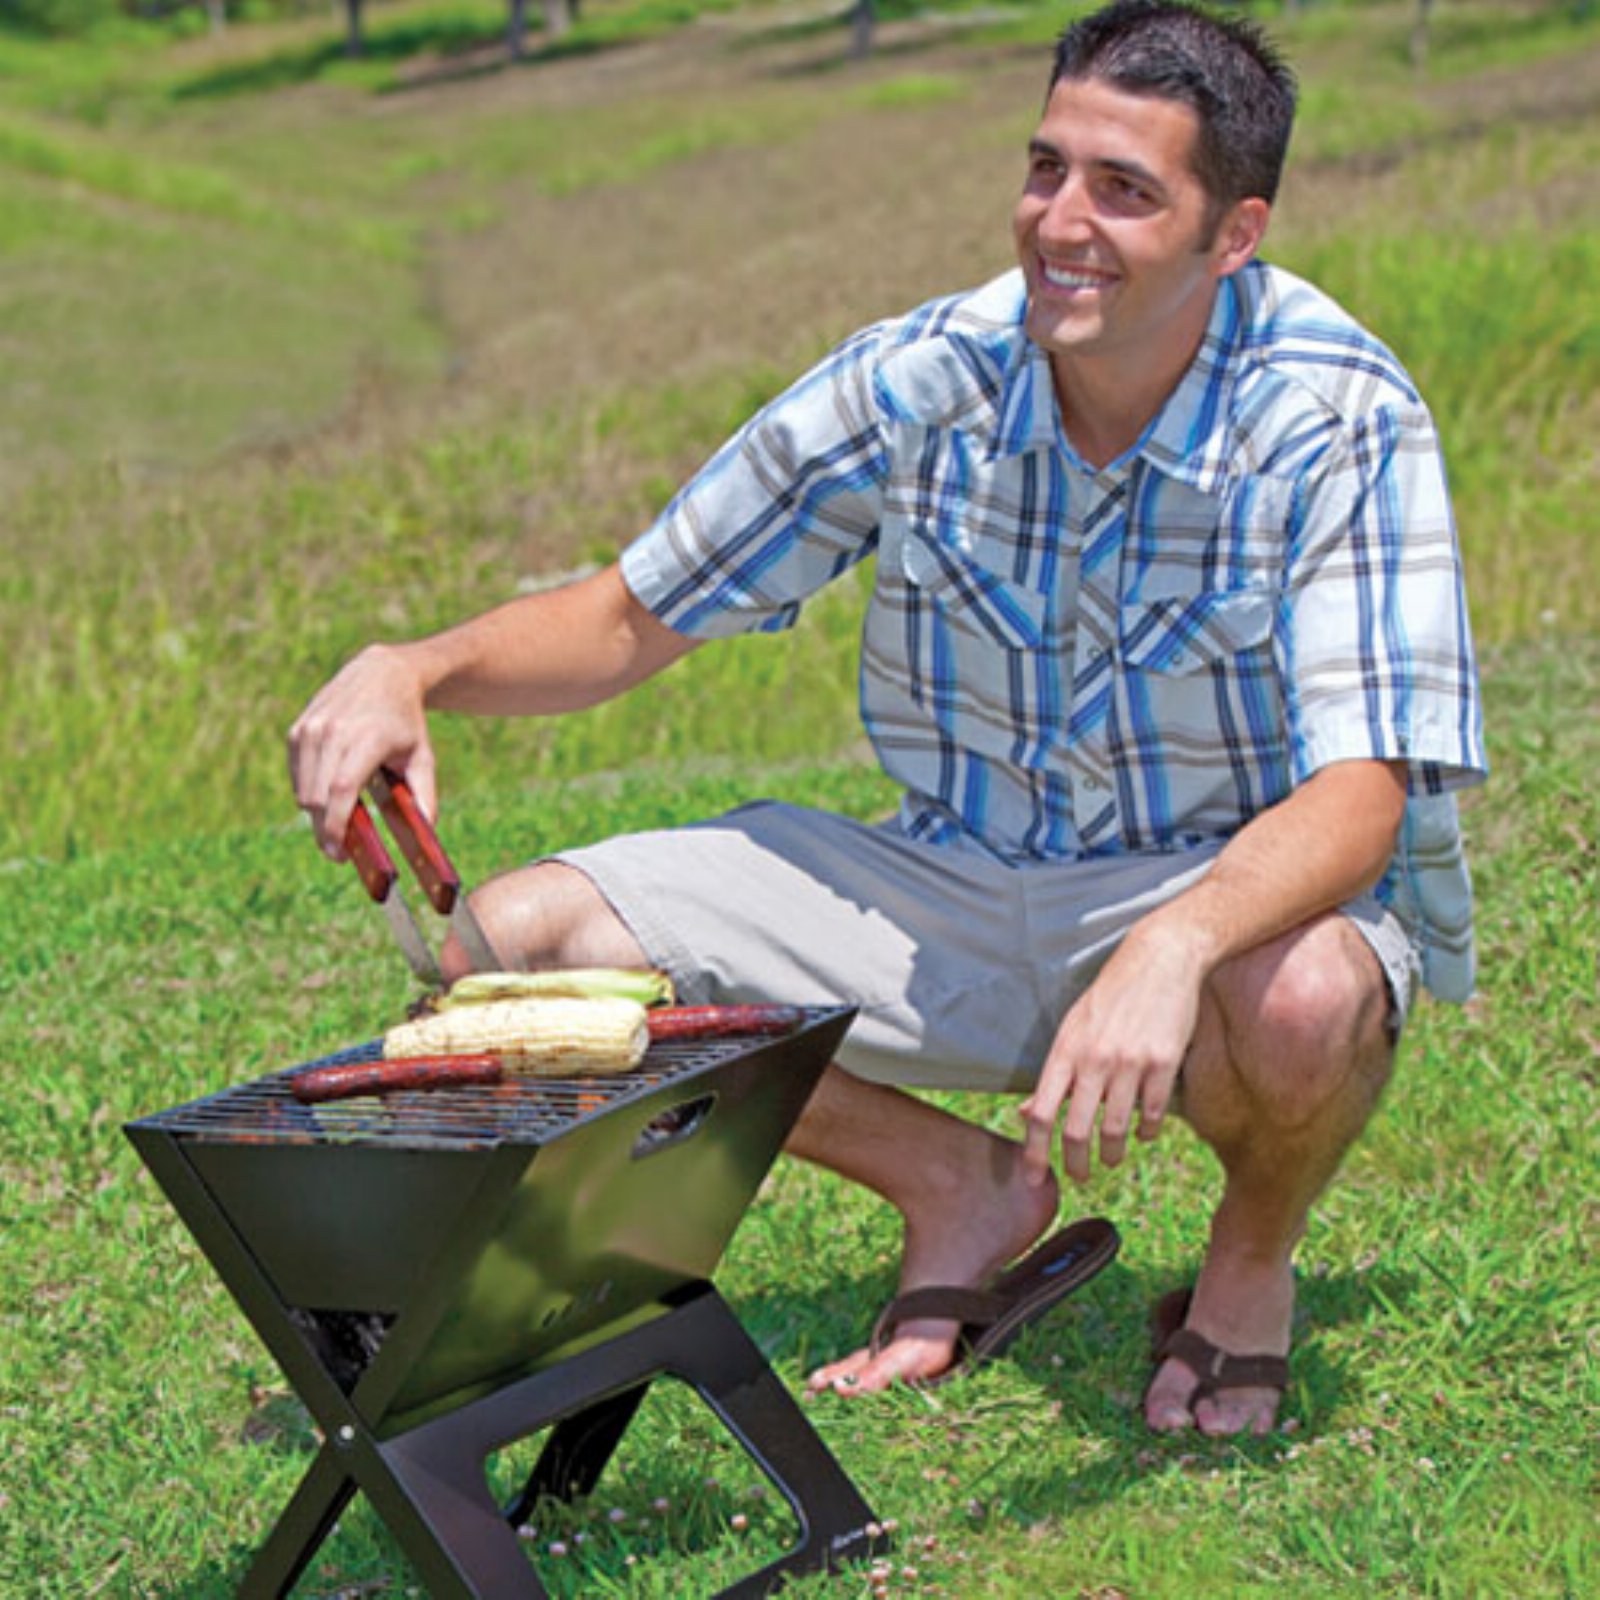 X Grill Compact Portable Charcoal Grill - image 1 of 7